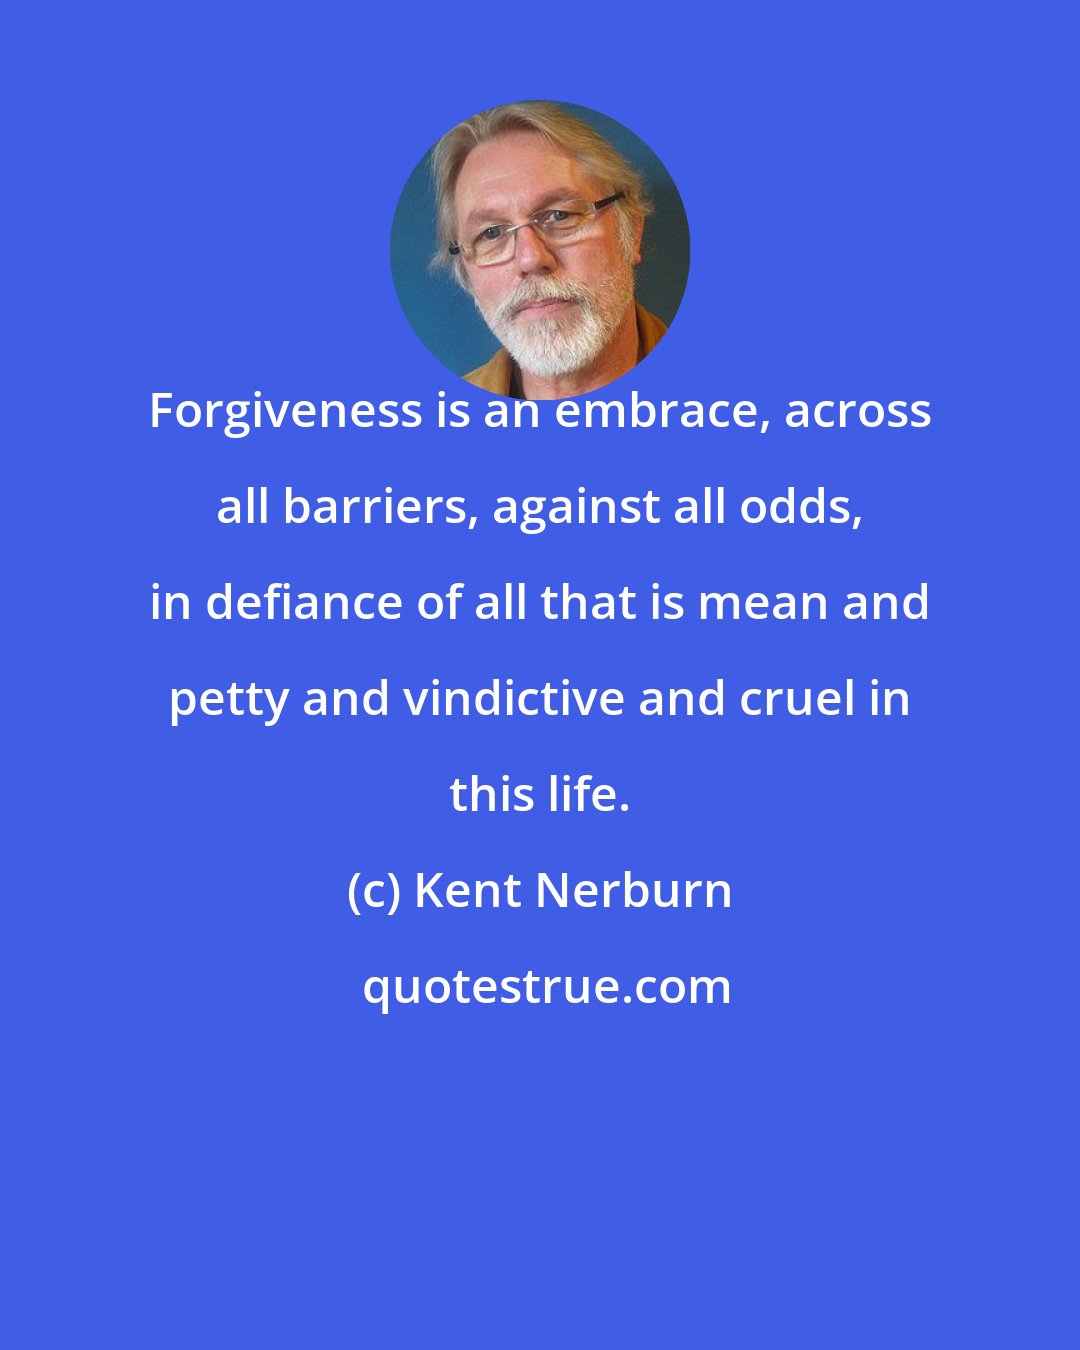 Kent Nerburn: Forgiveness is an embrace, across all barriers, against all odds, in defiance of all that is mean and petty and vindictive and cruel in this life.